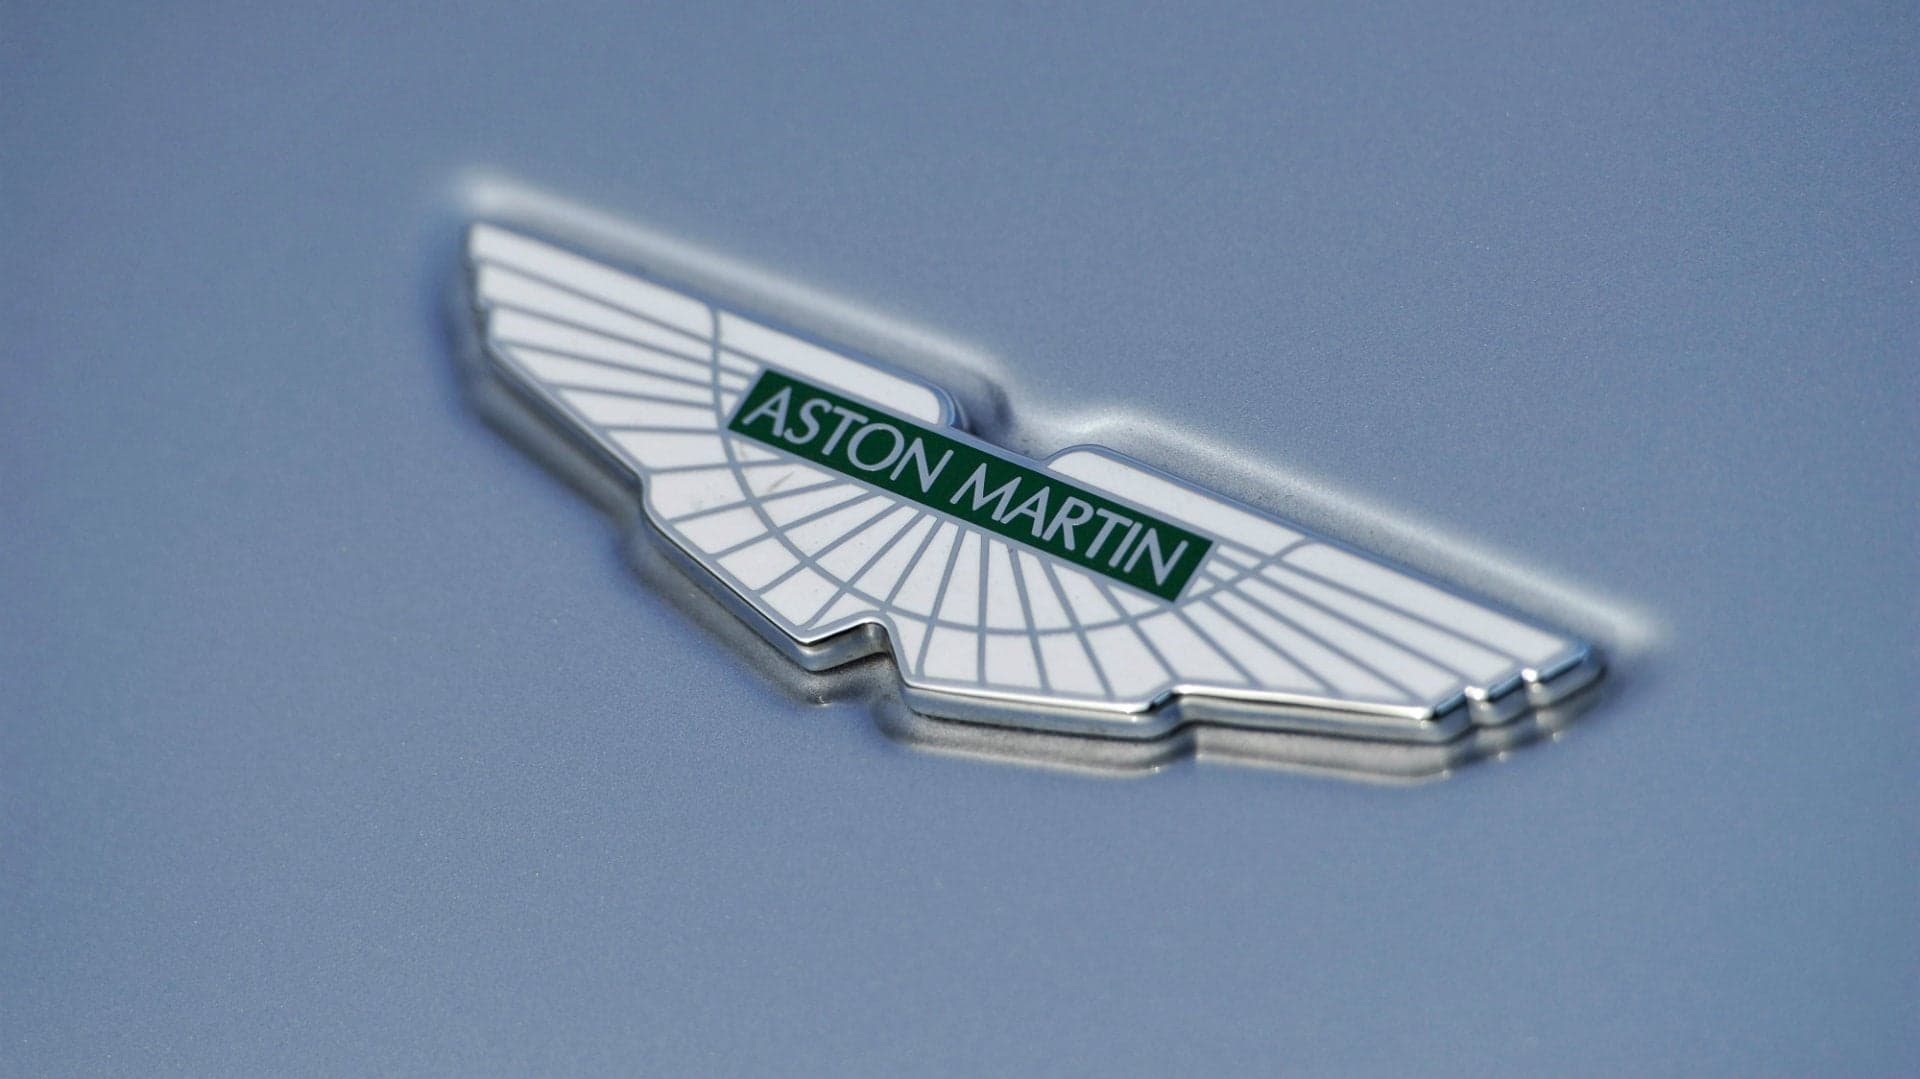 Aston Martin & Cosworth Attended the F1 Engine Meeting